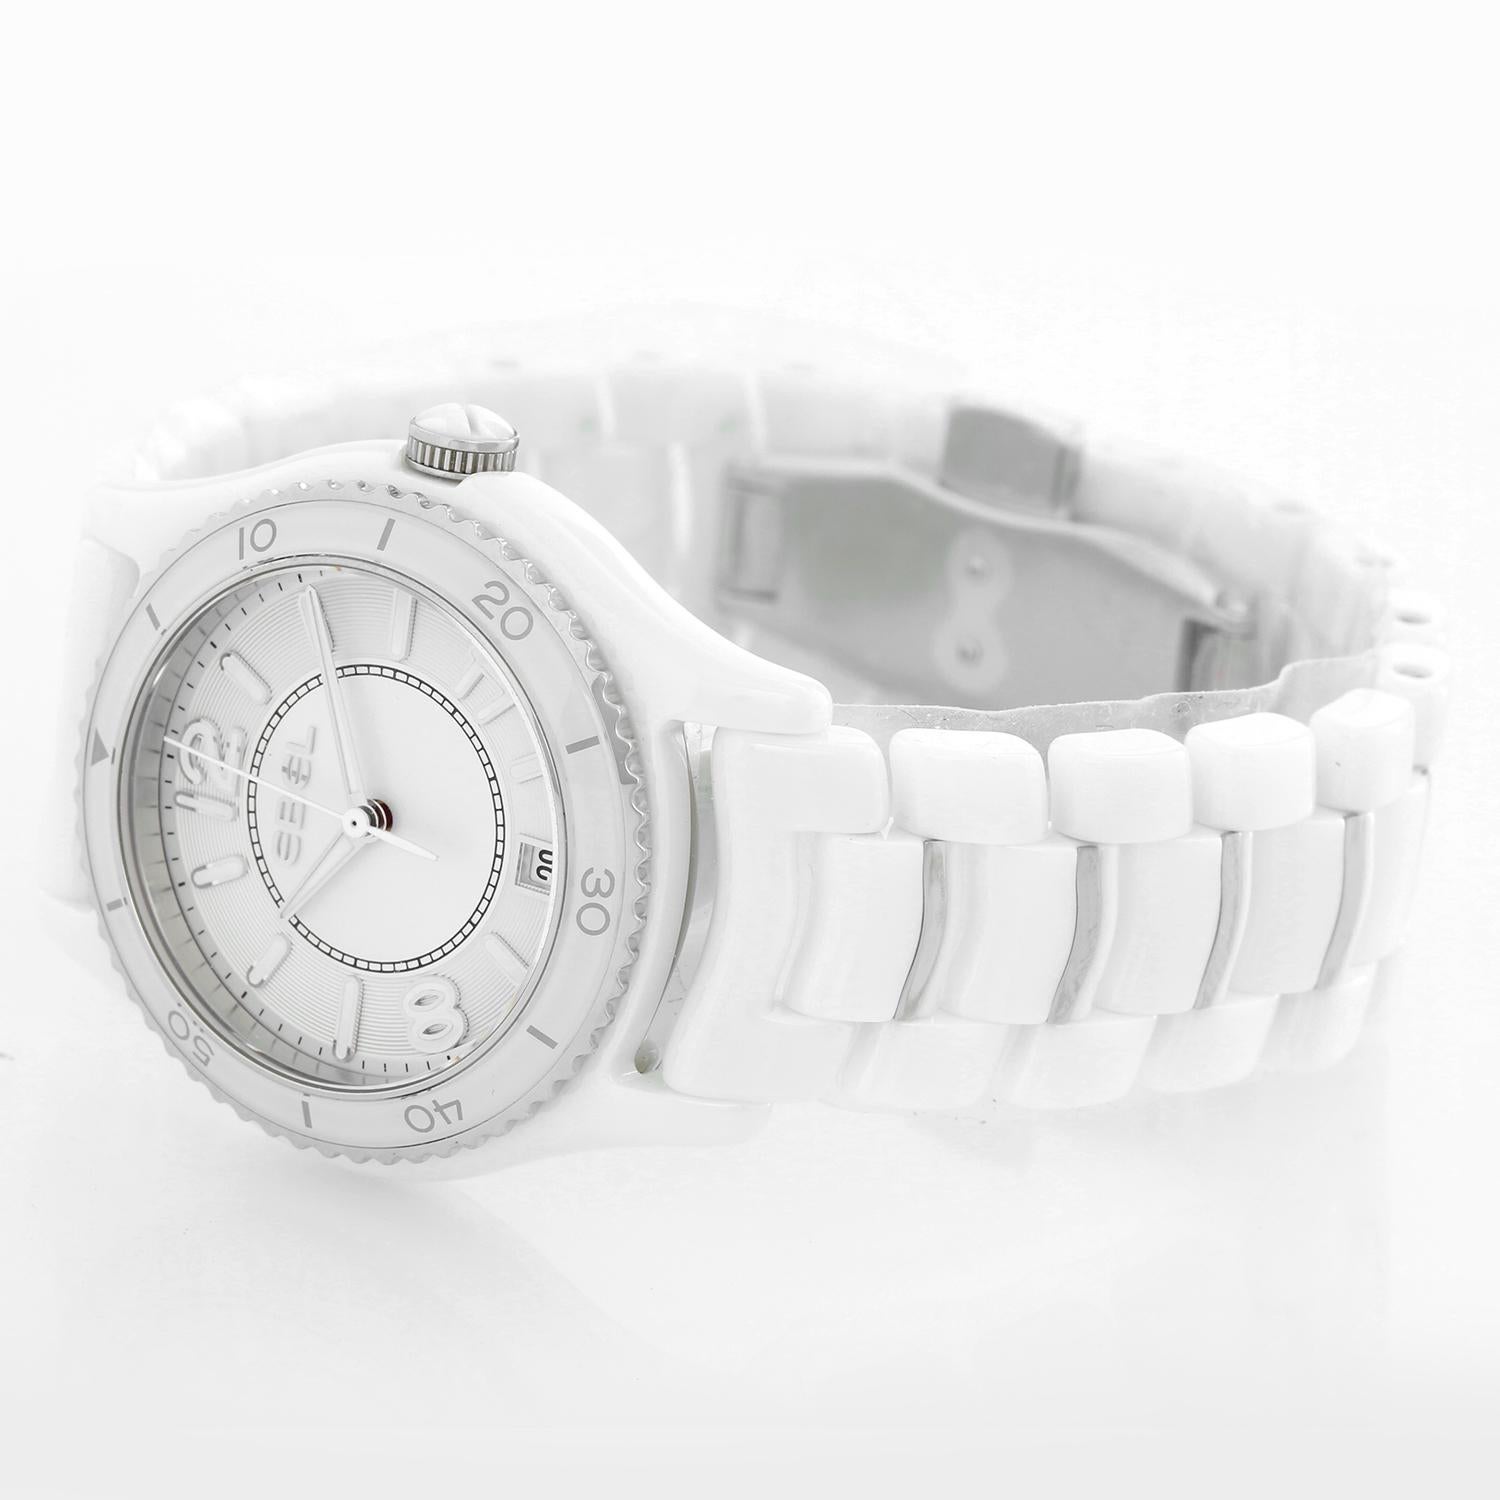 Ebel X-1 Silver Dial White Ceramic Ladies Watch 1216129 - Quartz. White ceramic case;  uni-directional rotating stainless steel bezel with a white ceramic top ring. Silver dial with luminous silver-tone hands and index hour markers. Arabic numerals